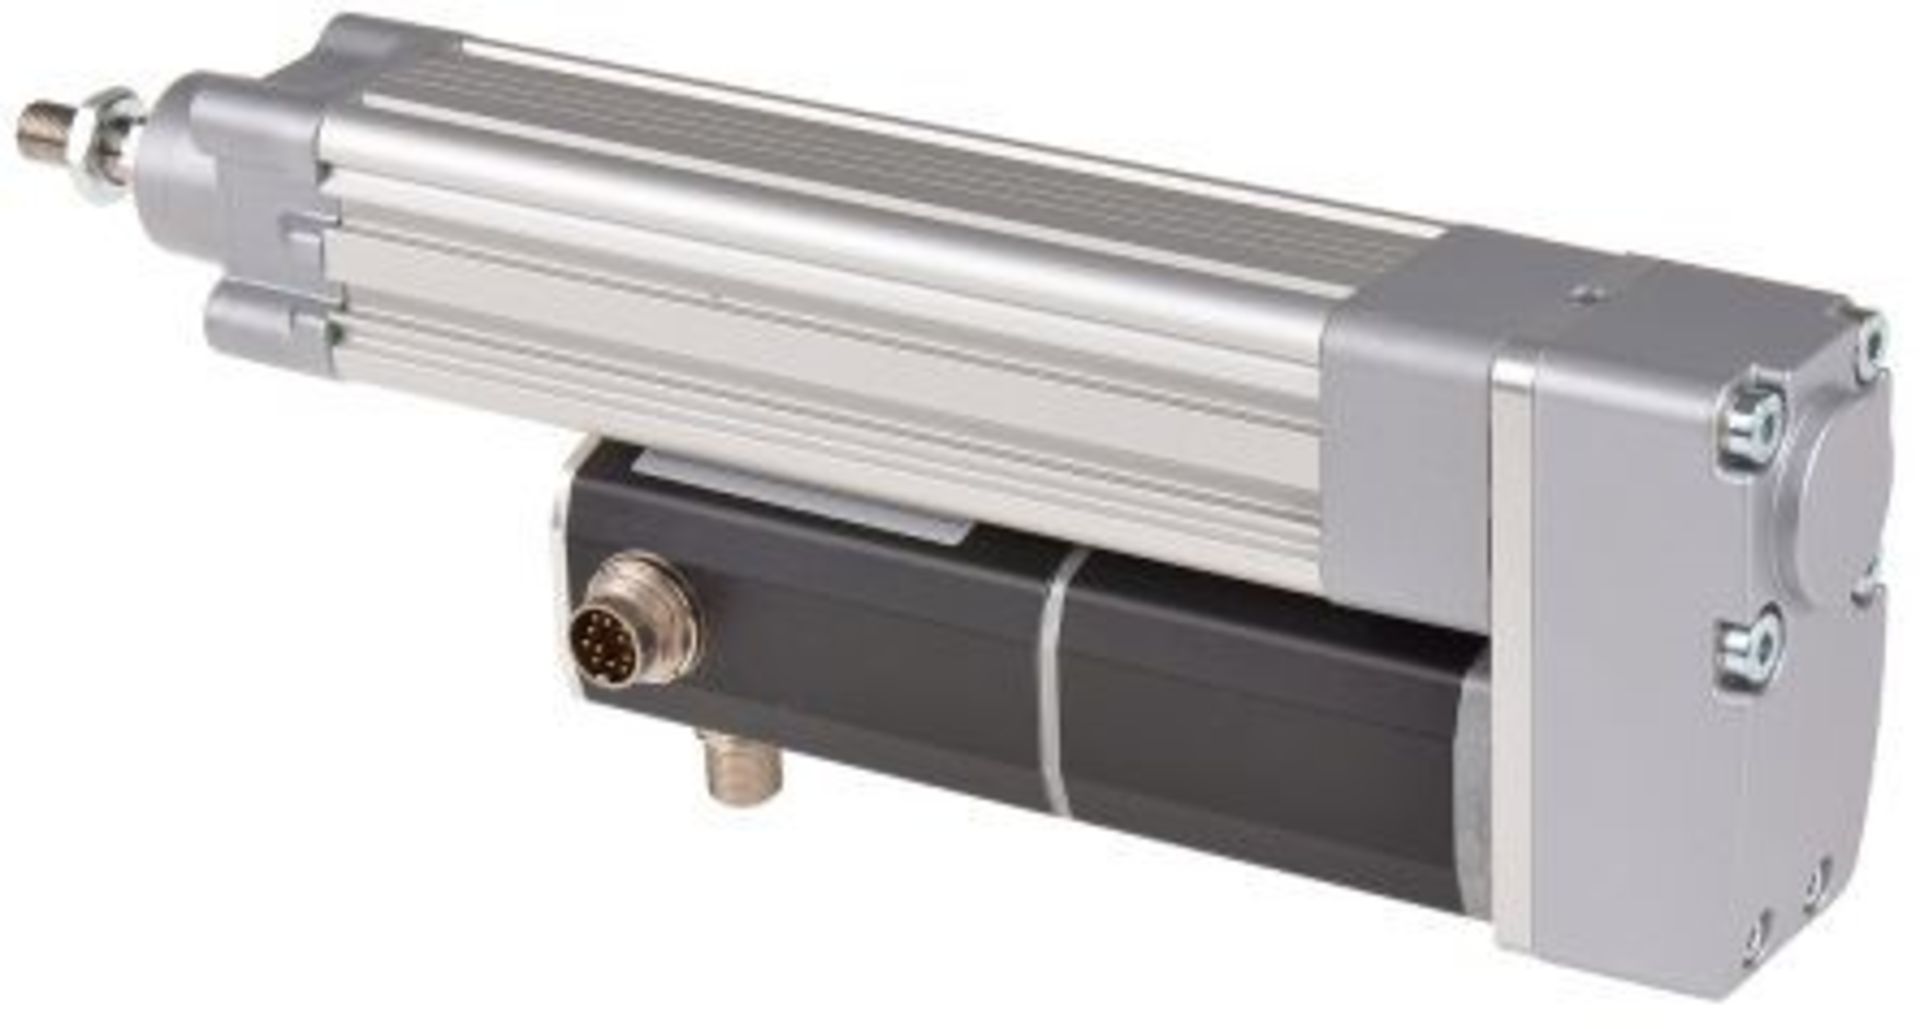 SKF Linear Actuator CASM-32 Series, 100mm stroke - 8802090 - Image 2 of 2